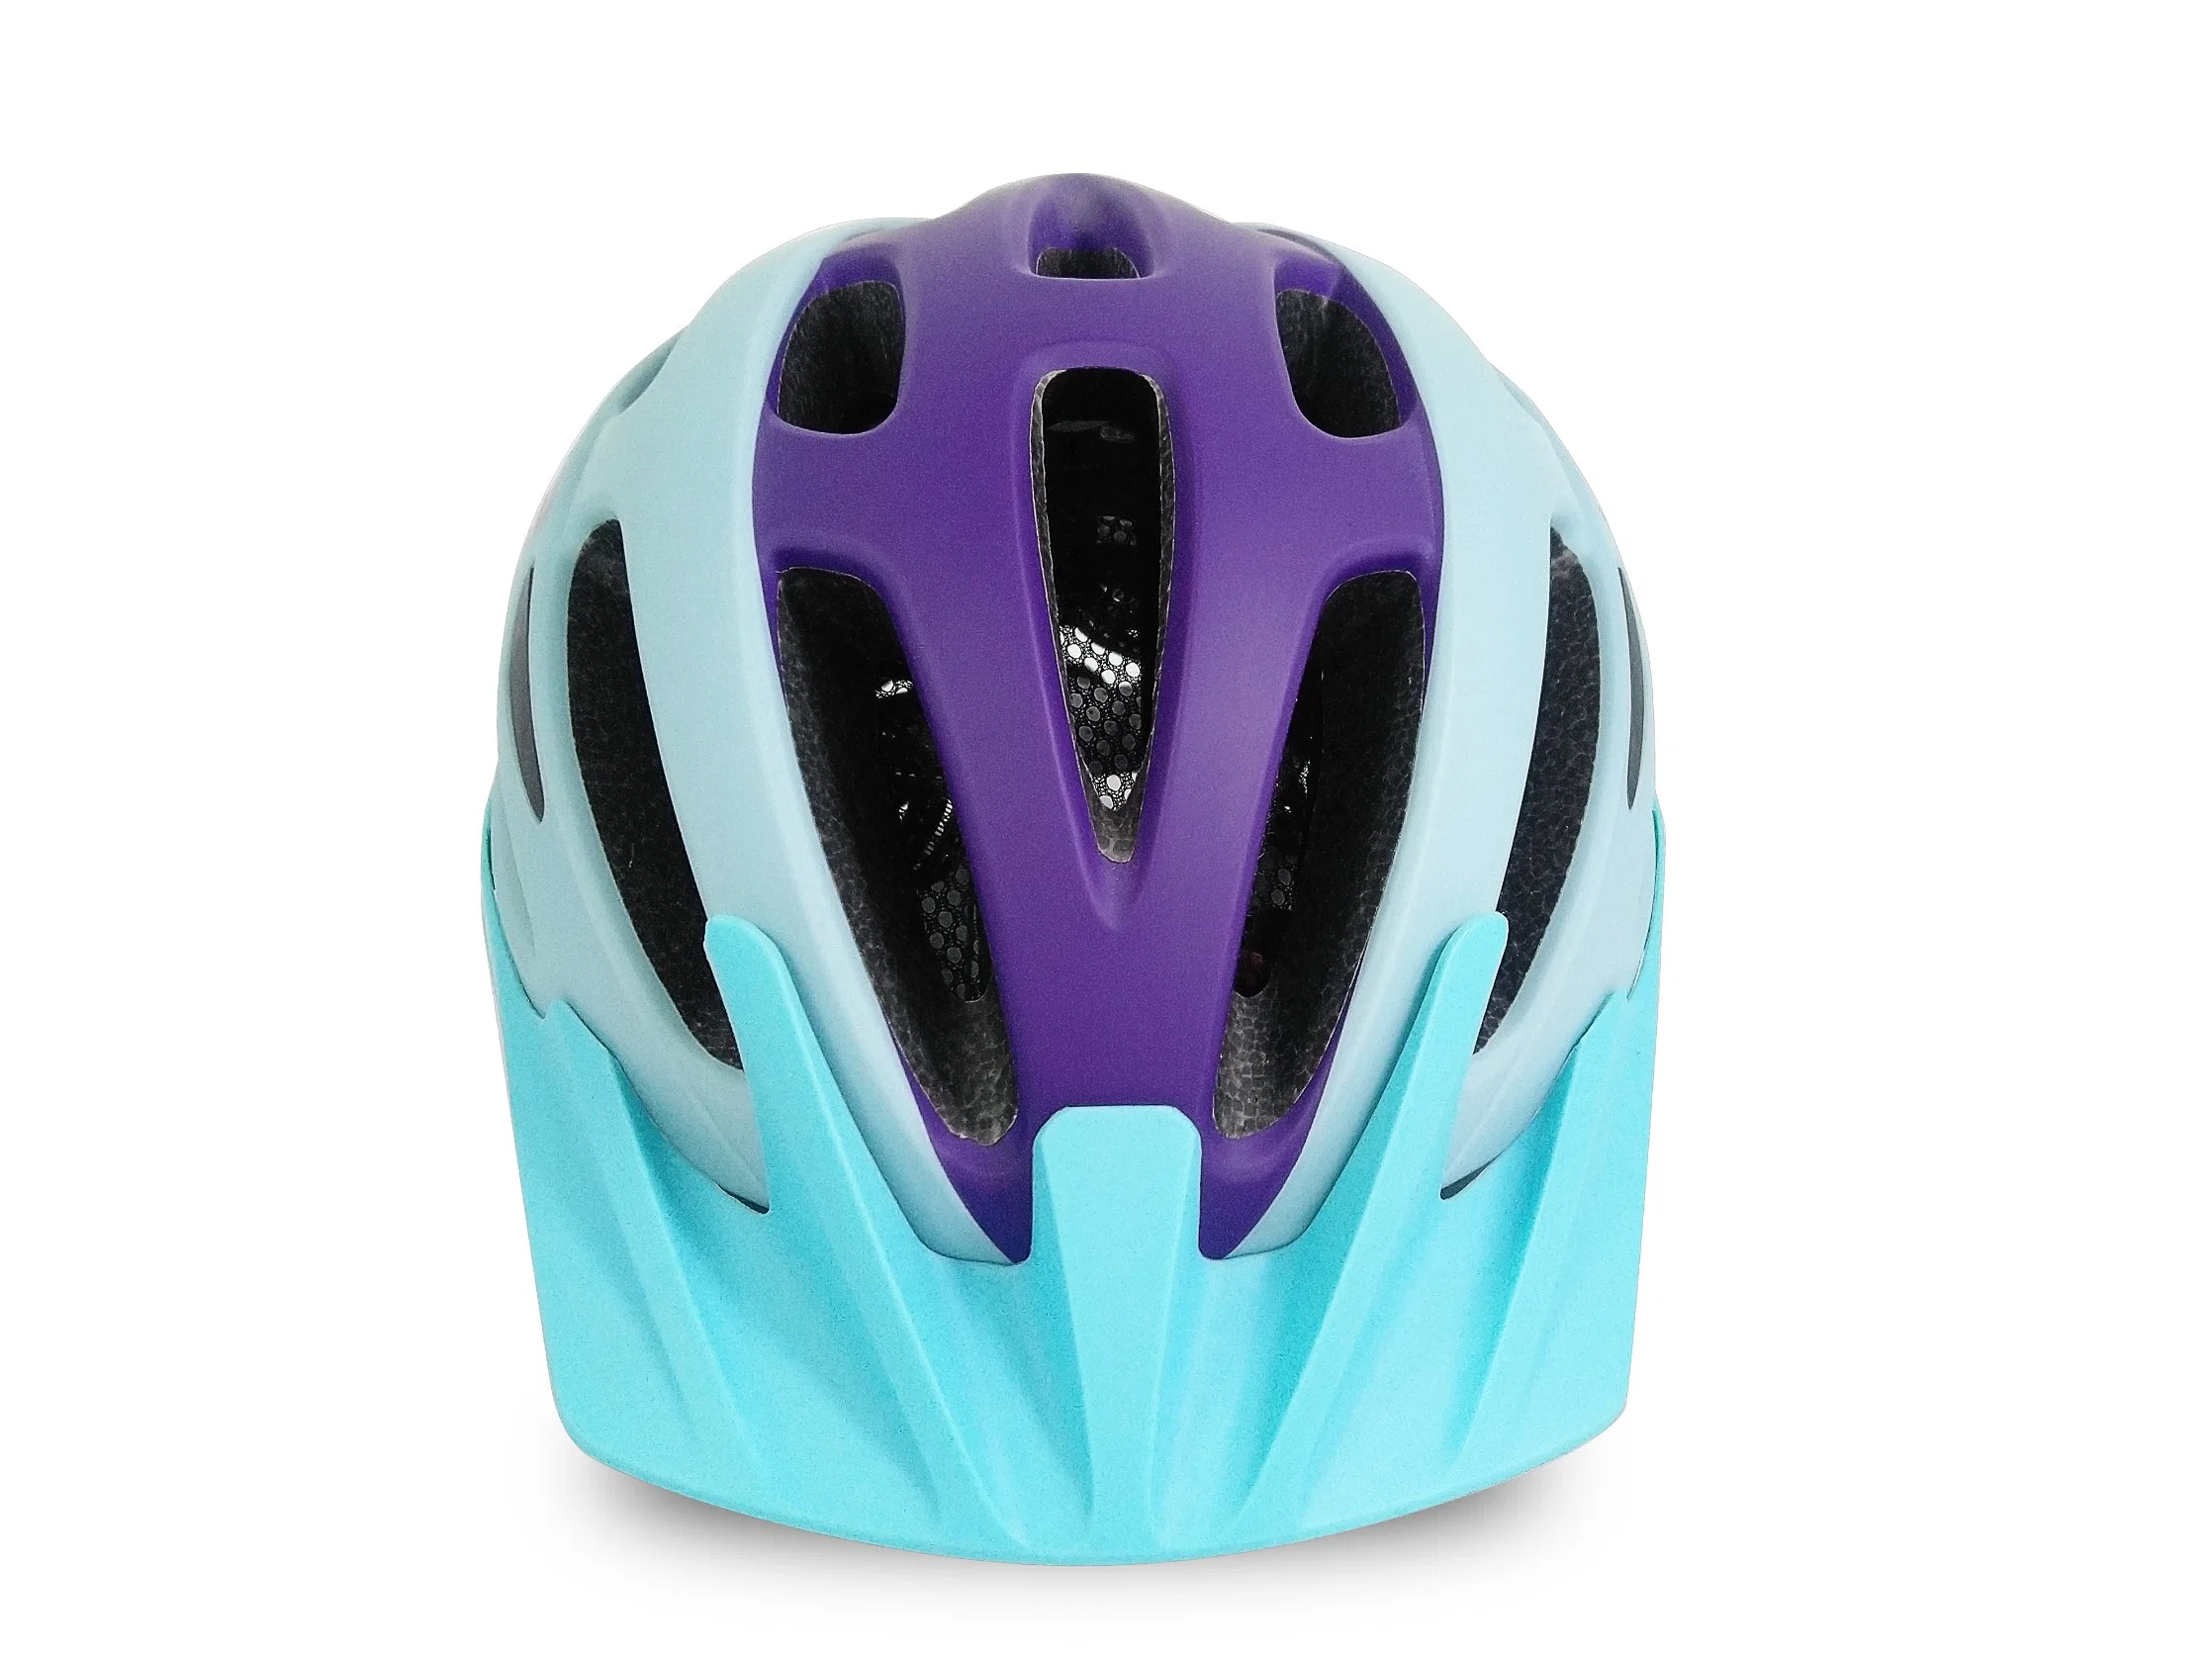 CE&Cpsc PC in-Mould High quality/High cost performance Safety Helmet 3 Size Casco Bicicleta Bike Helmets for Teen and Adults